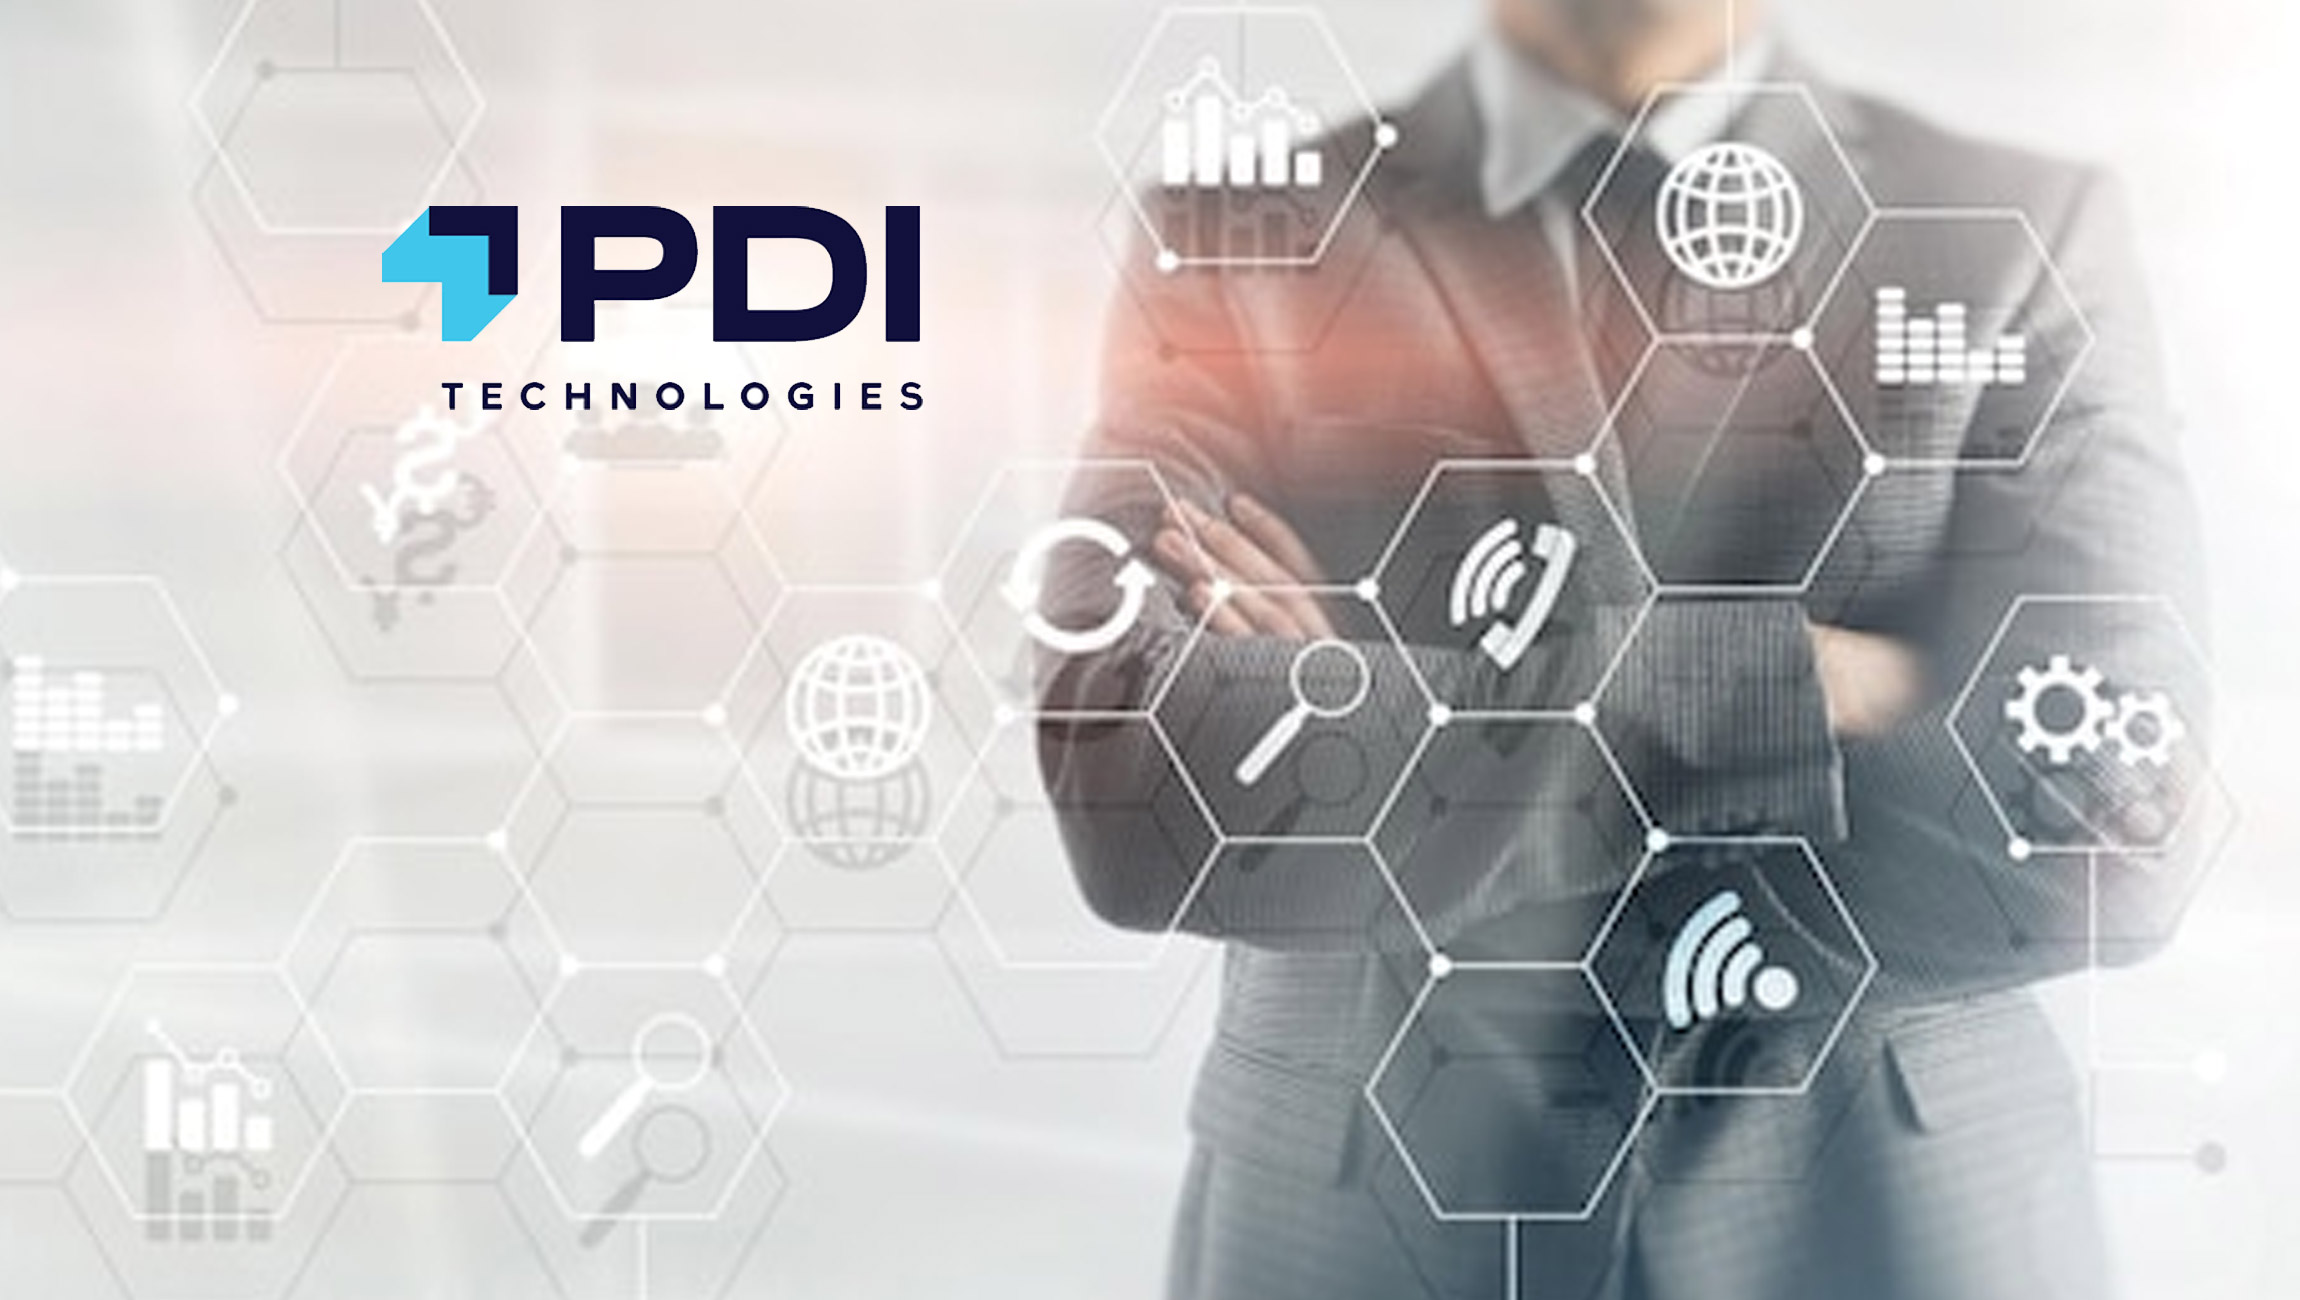 PDI Technologies Introduces New Solutions to Support Industry Transformation Across Convenience Ecosystem